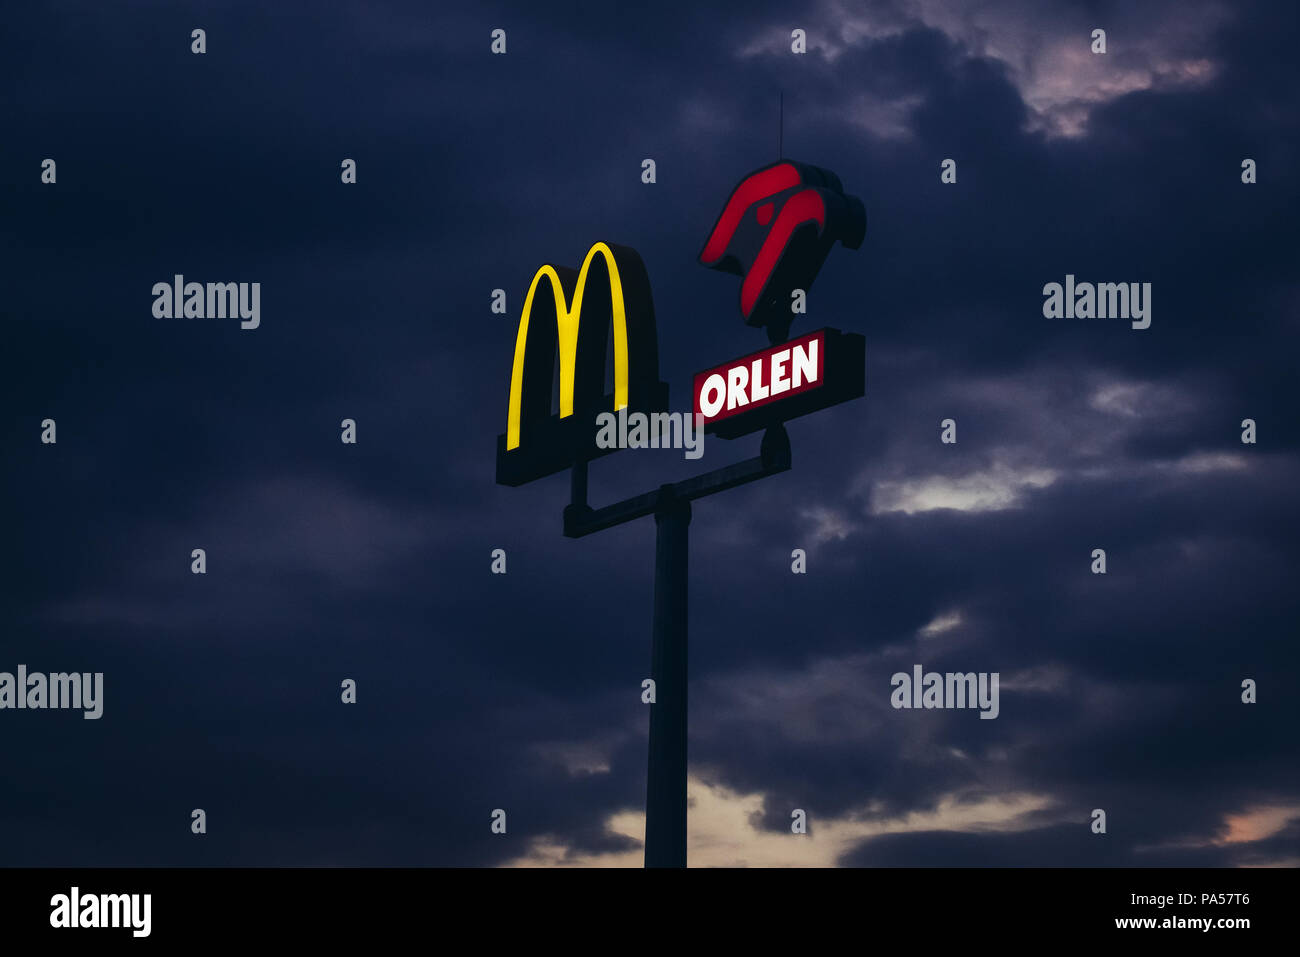 McDonald's and PKN Olren sign in Poland Stock Photo